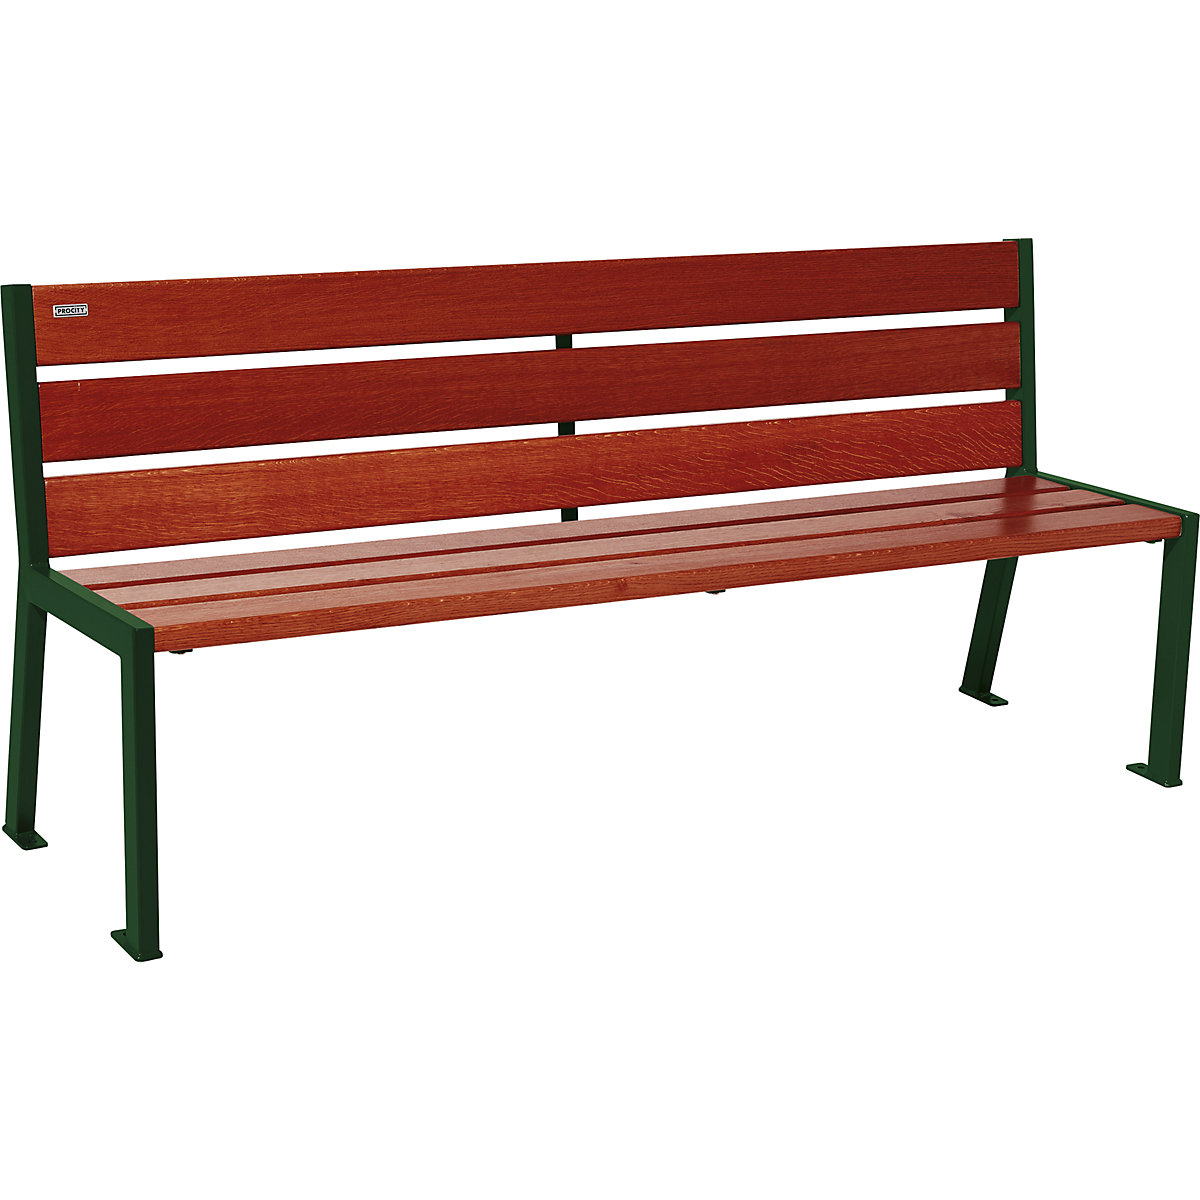 SILAOS® bench made of wood – PROCITY, with back rest, length 1800 mm, moss green RAL 6005, mahogany-3